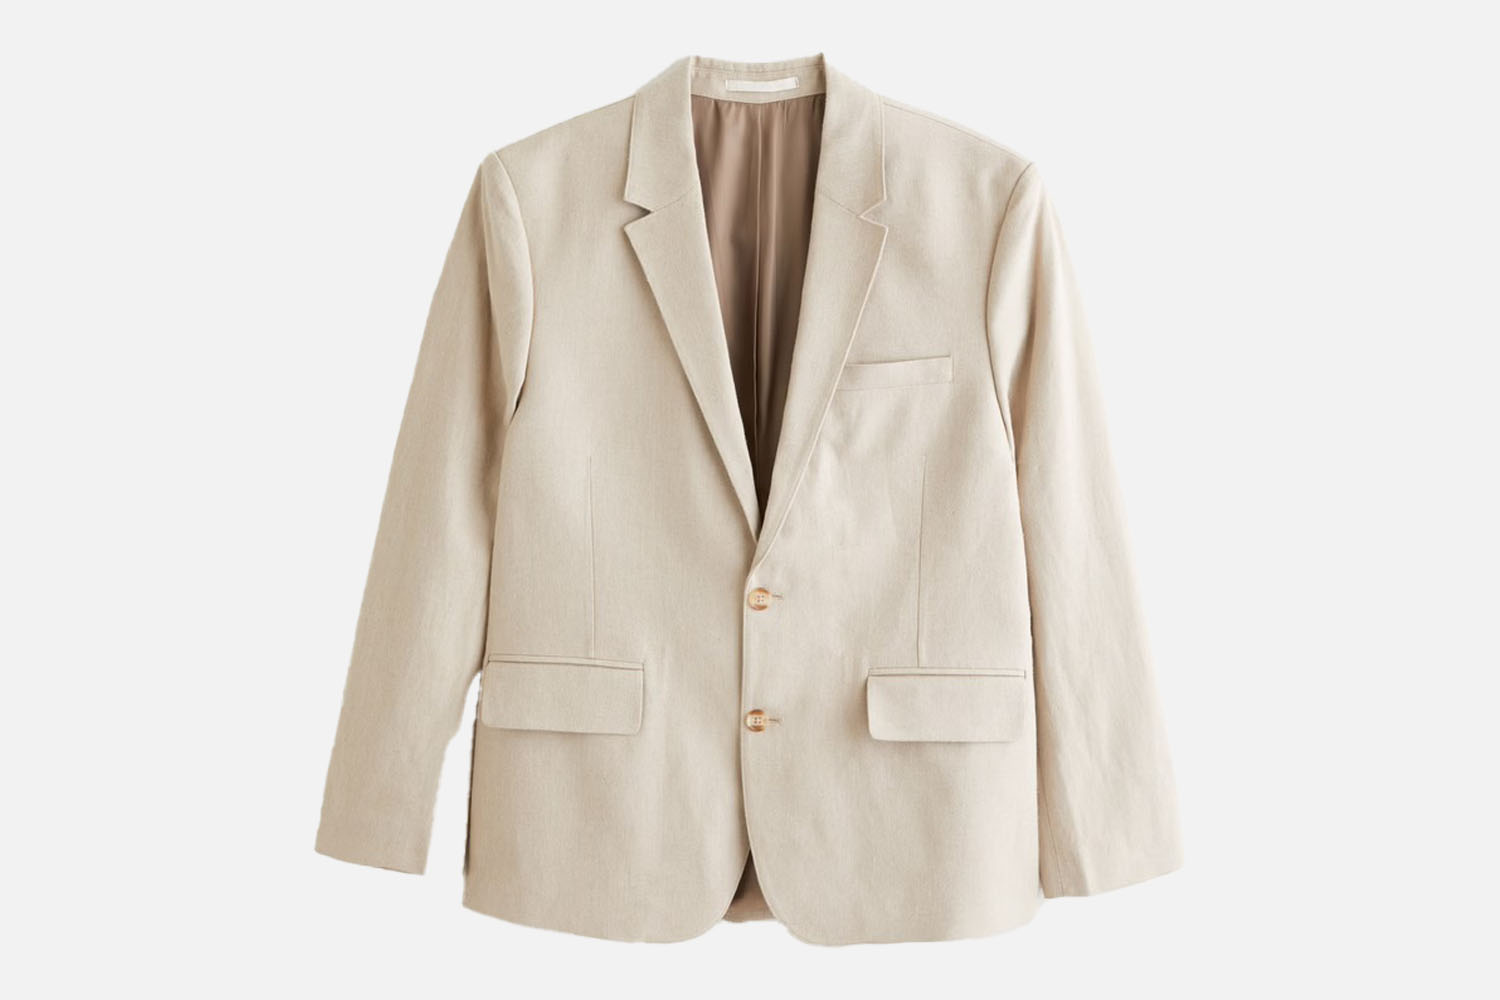 Abercrombie & Fitch Collins Tailored Classic Linen-Blend Blazer